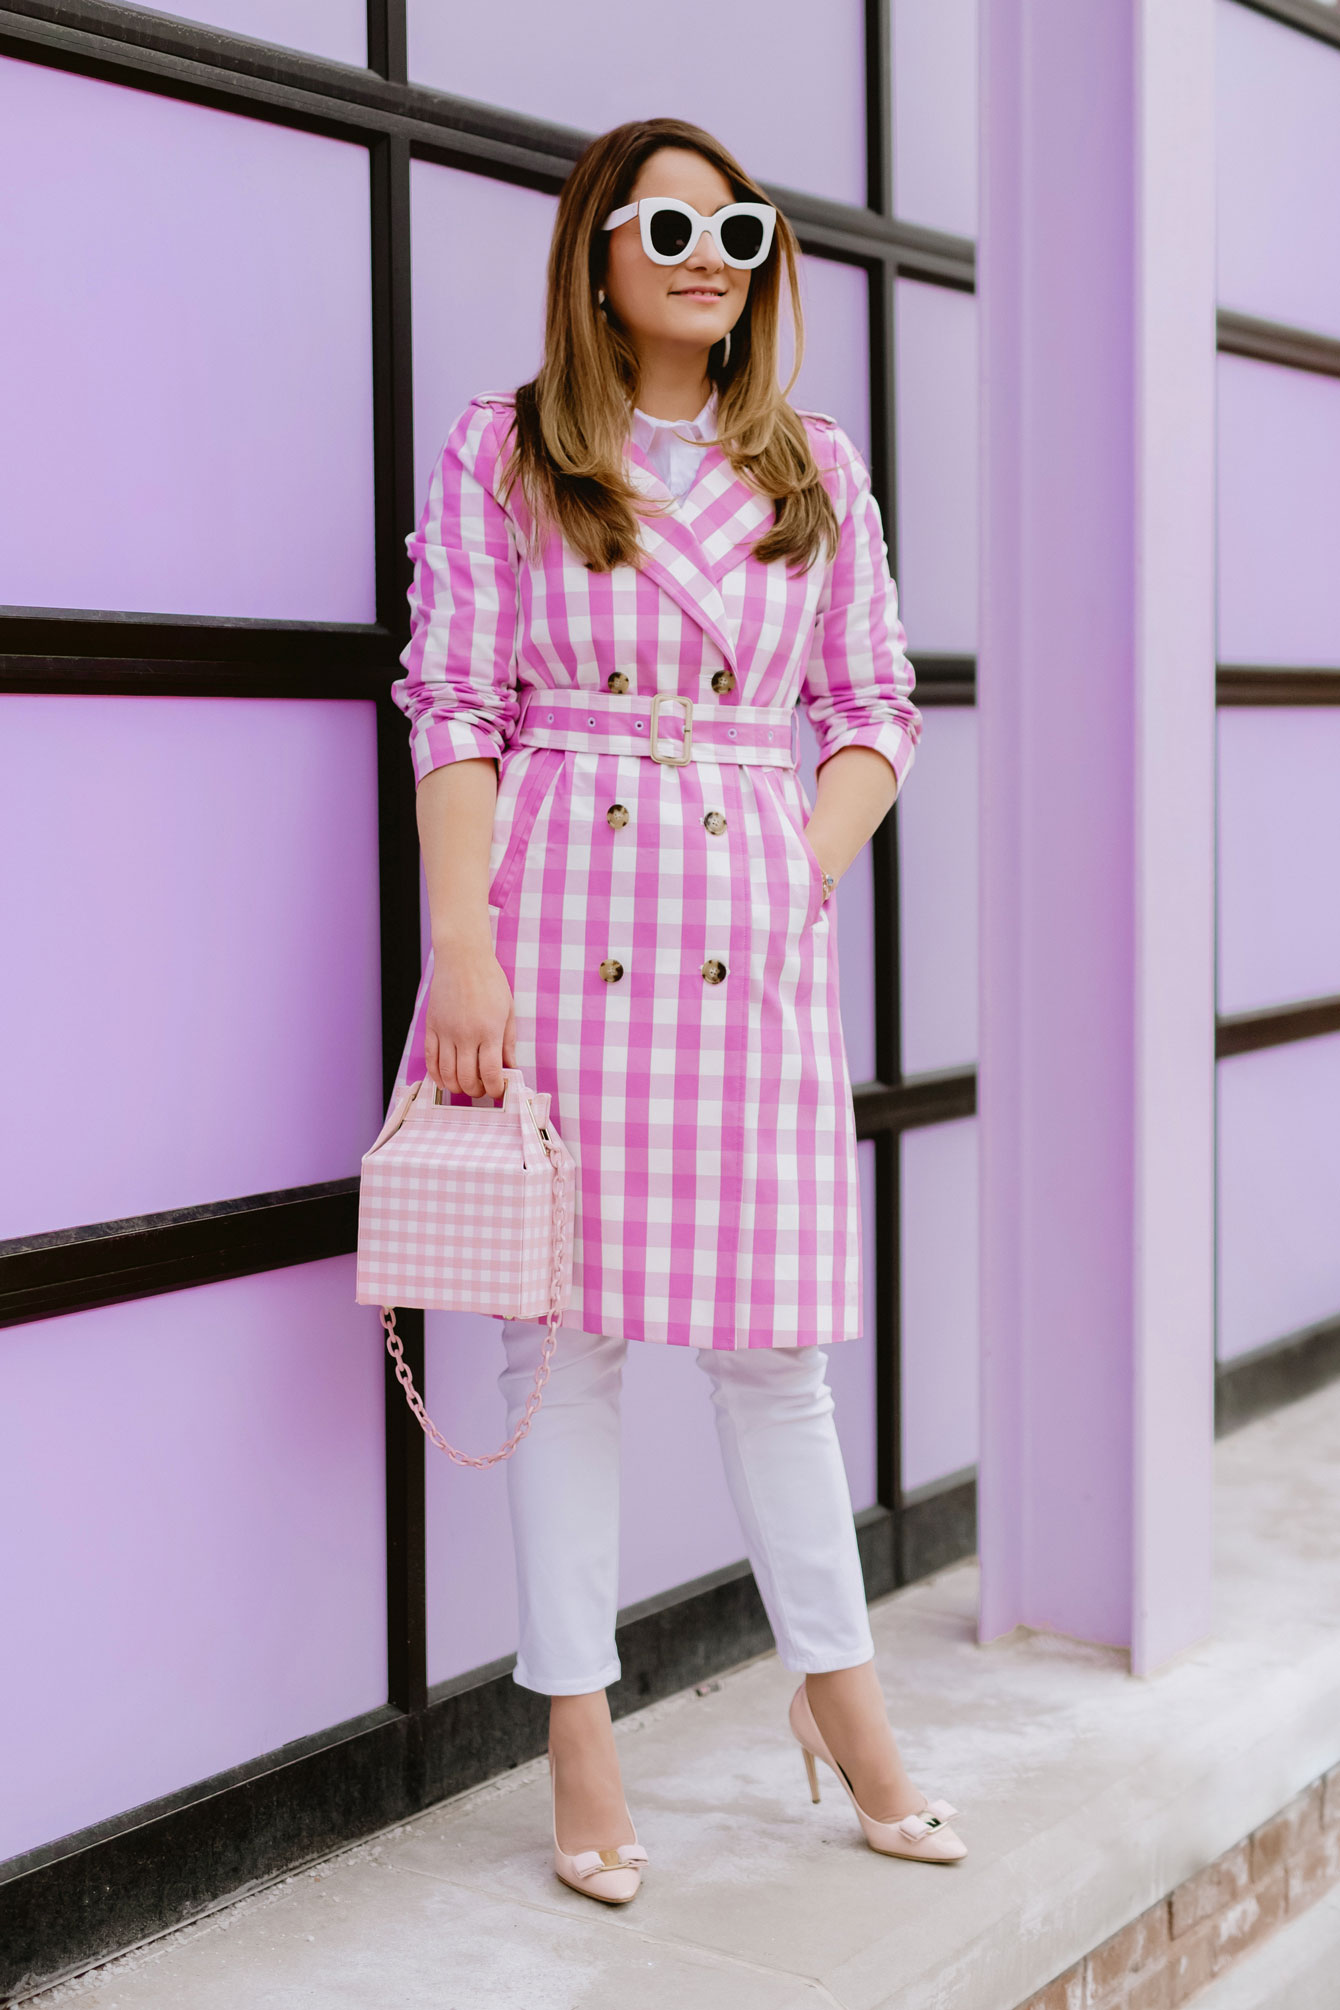 How to Wear Gingham